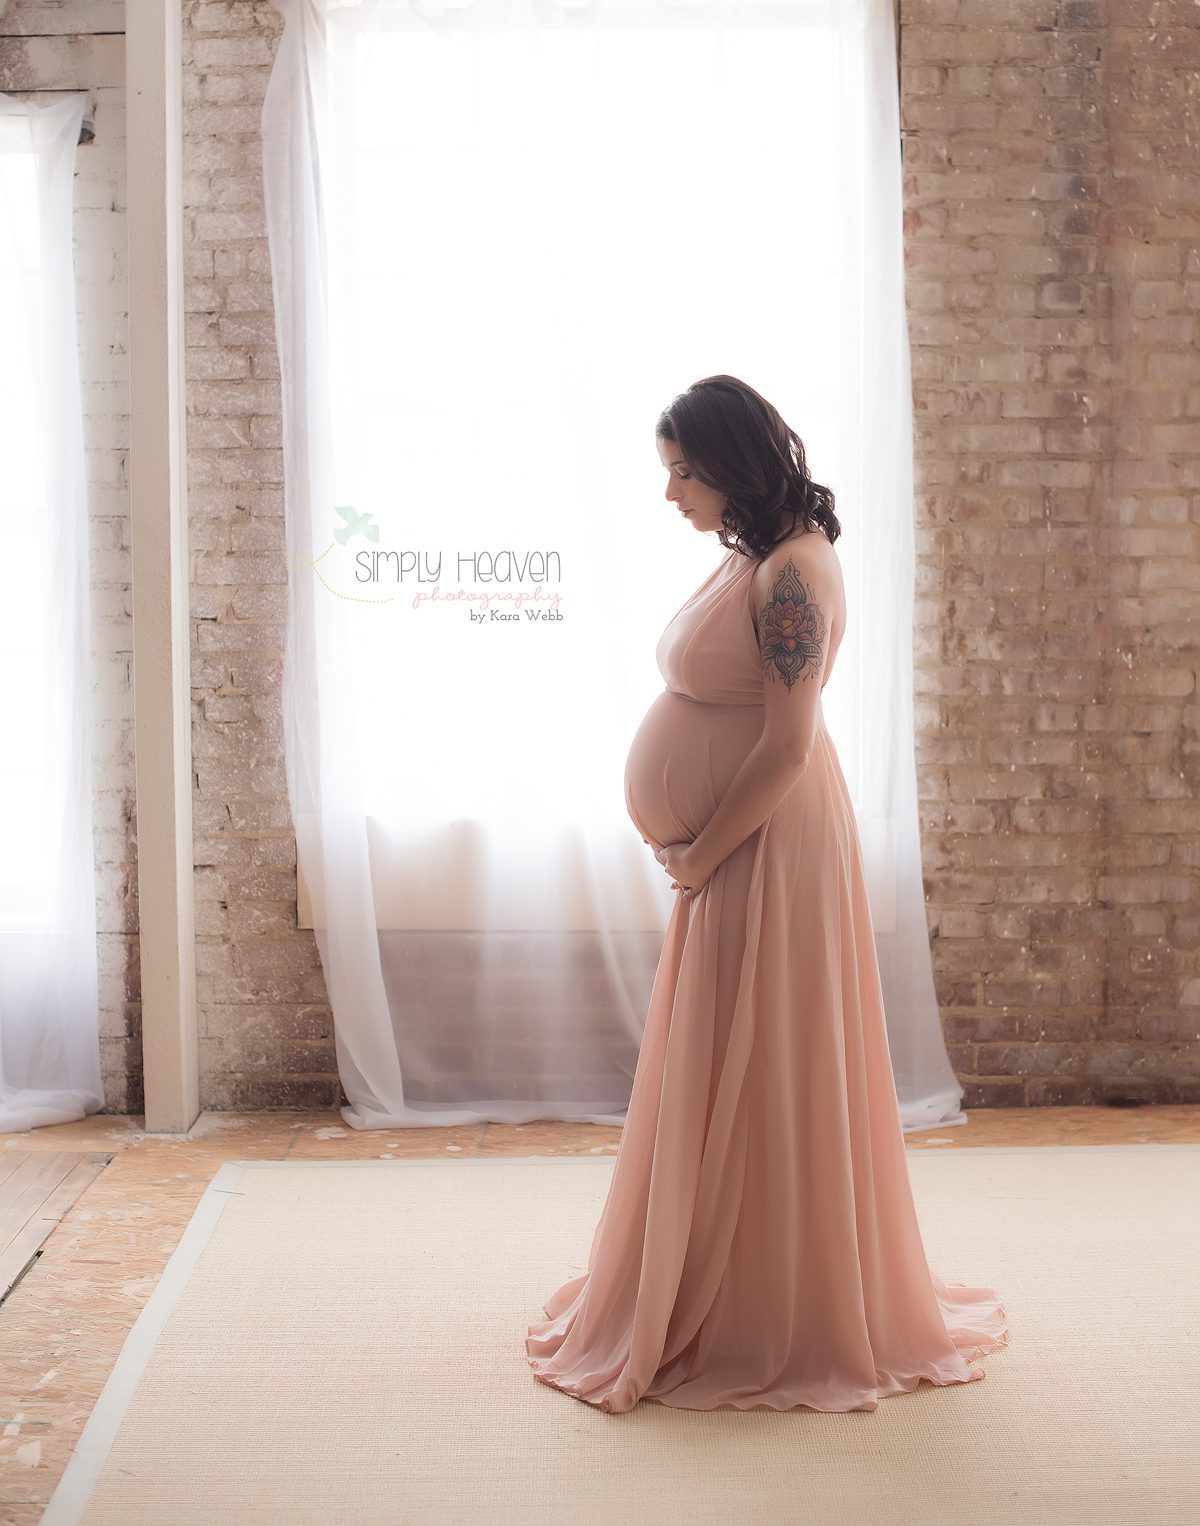 maternity pictures of a lady in a pink dress in front of brick wall and window